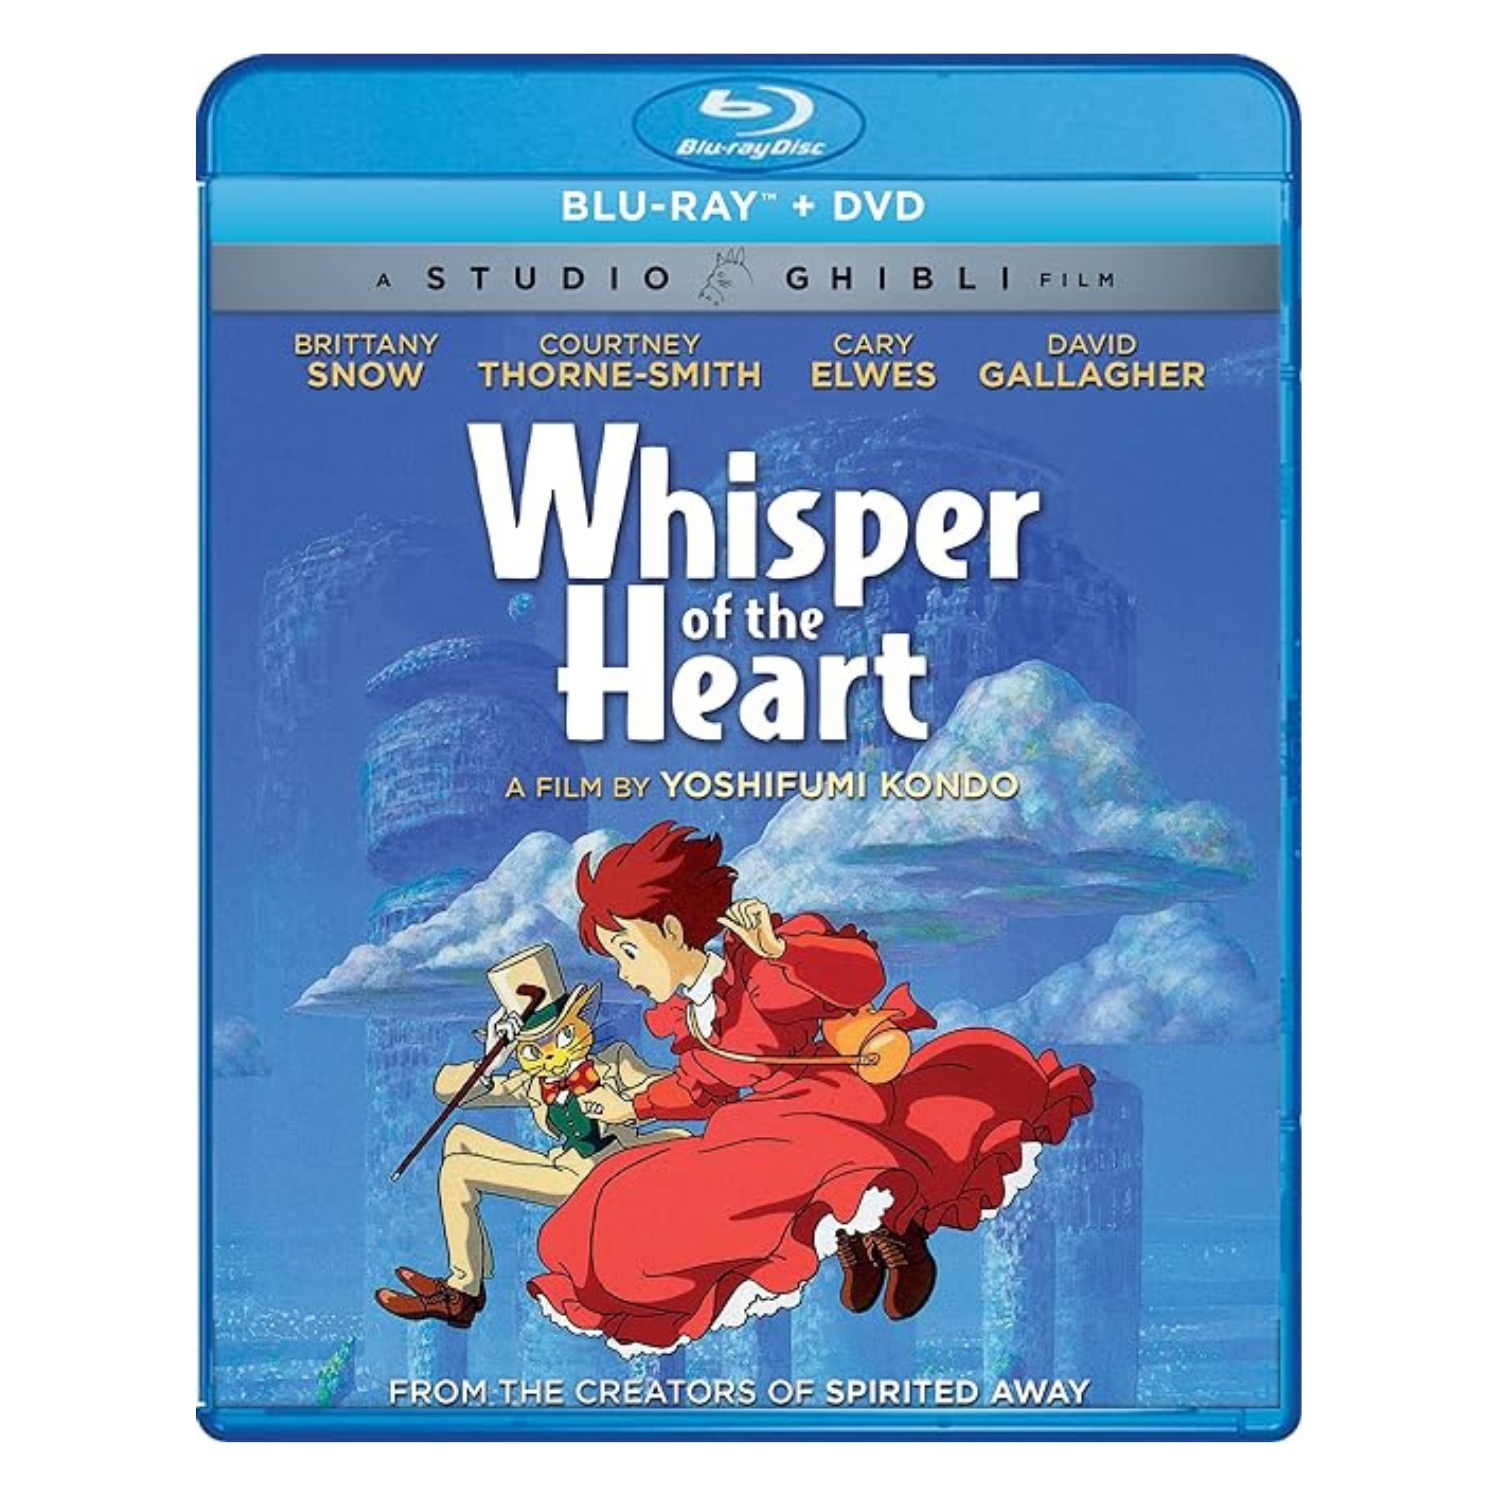 Whisper of the Heart on Blu-ray